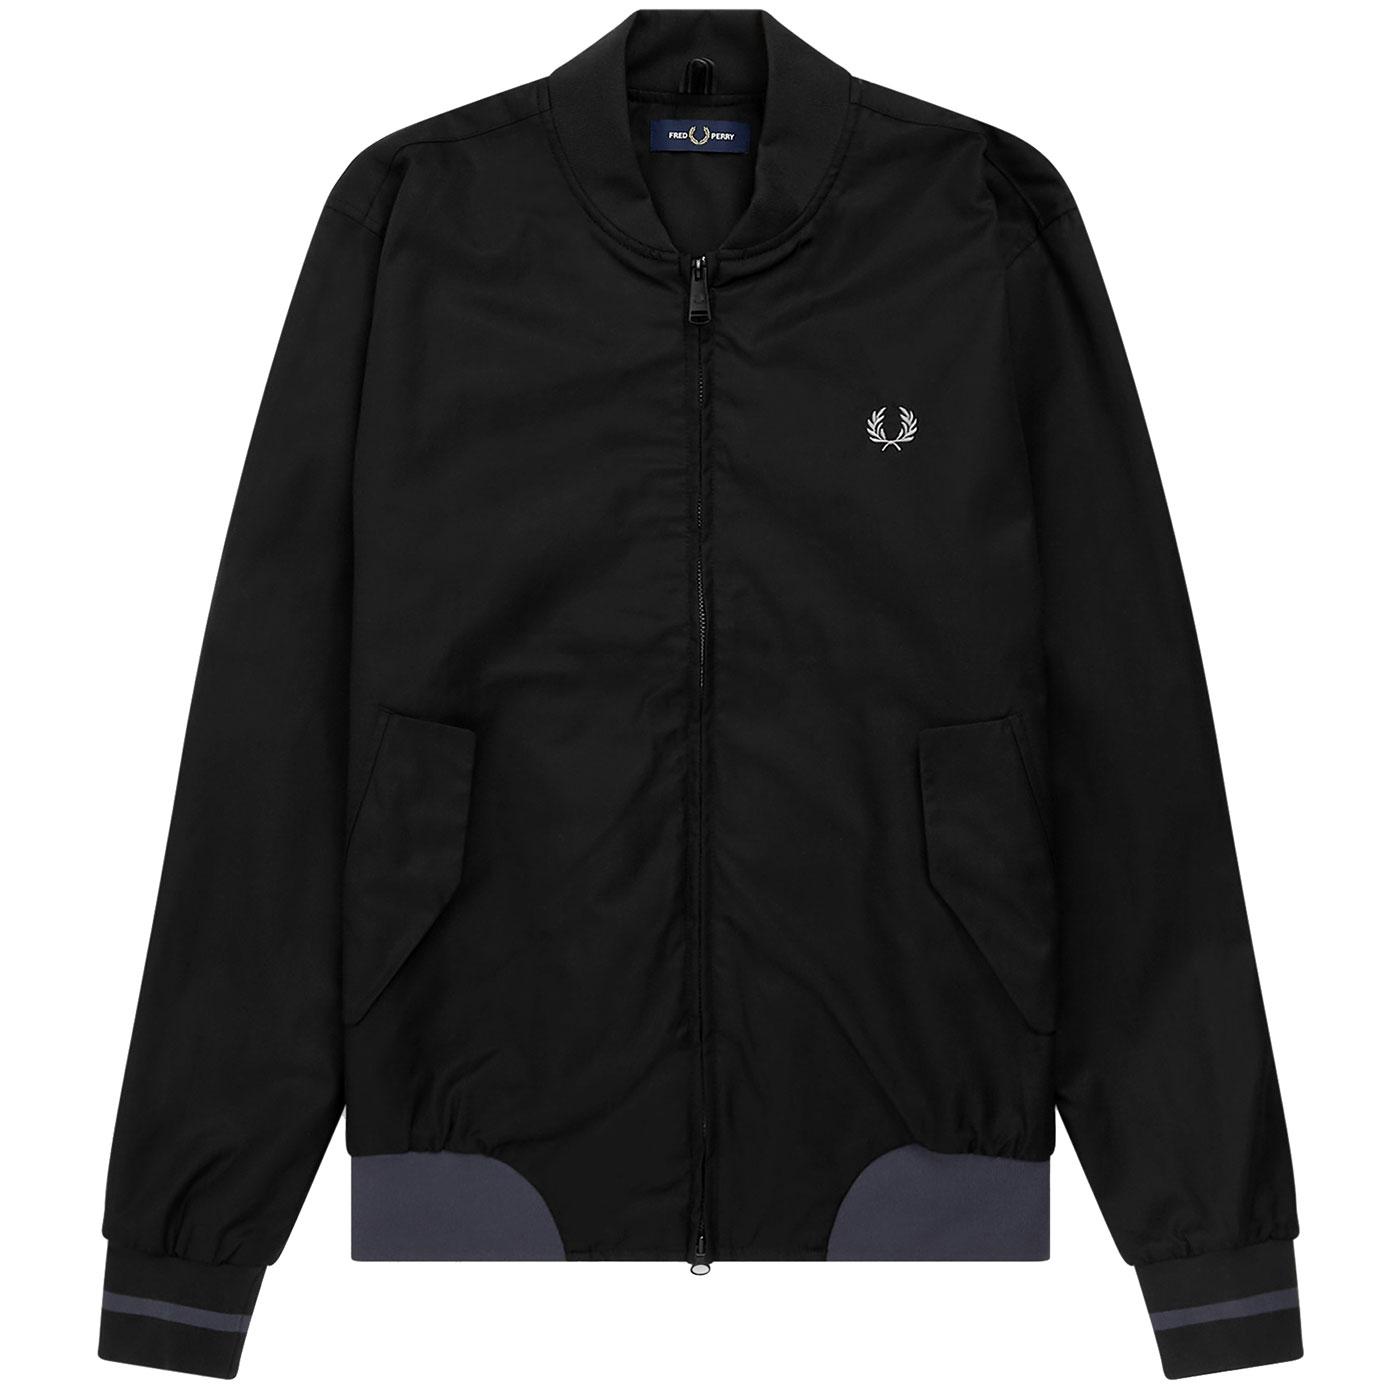 FRED PERRY Men's Retro Mod Twill Bomber Jacket (B)